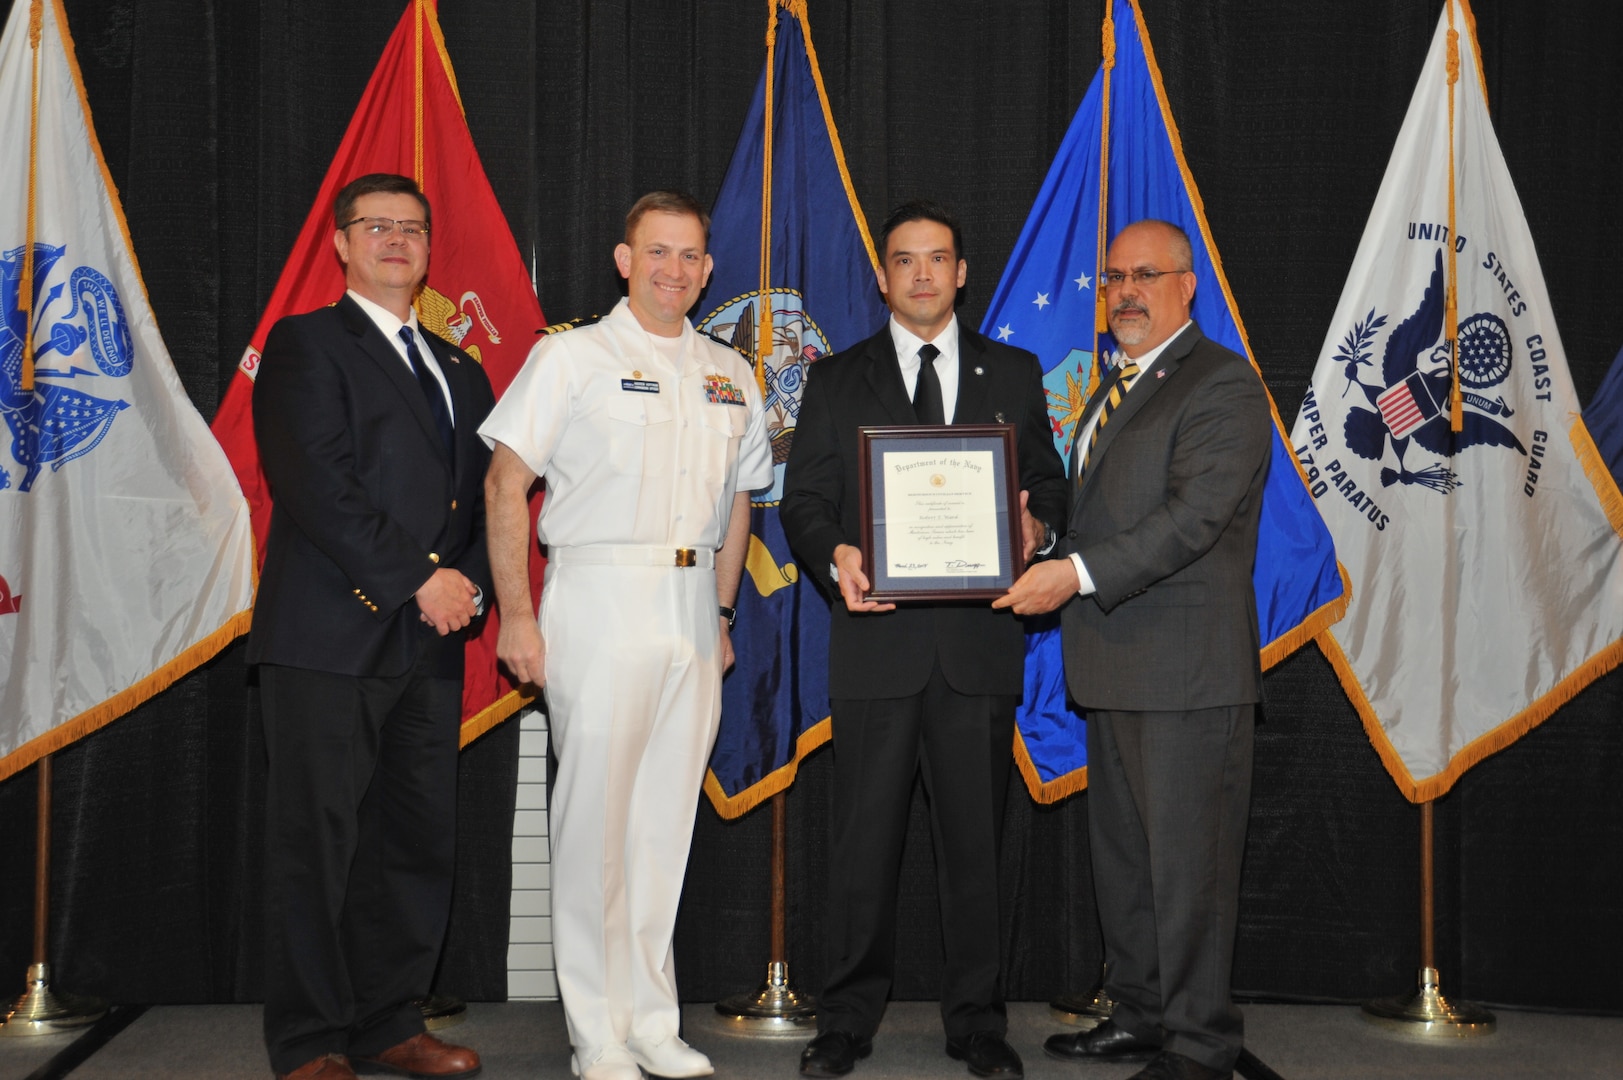 IMAGE: Robert Ward is presented the Navy Meritorious Civilian Service Award at Naval Surface Warfare Center Dahlgren Division's annual awards ceremony, Apr. 26 at the Fredericksburg Expo and Conference Center.